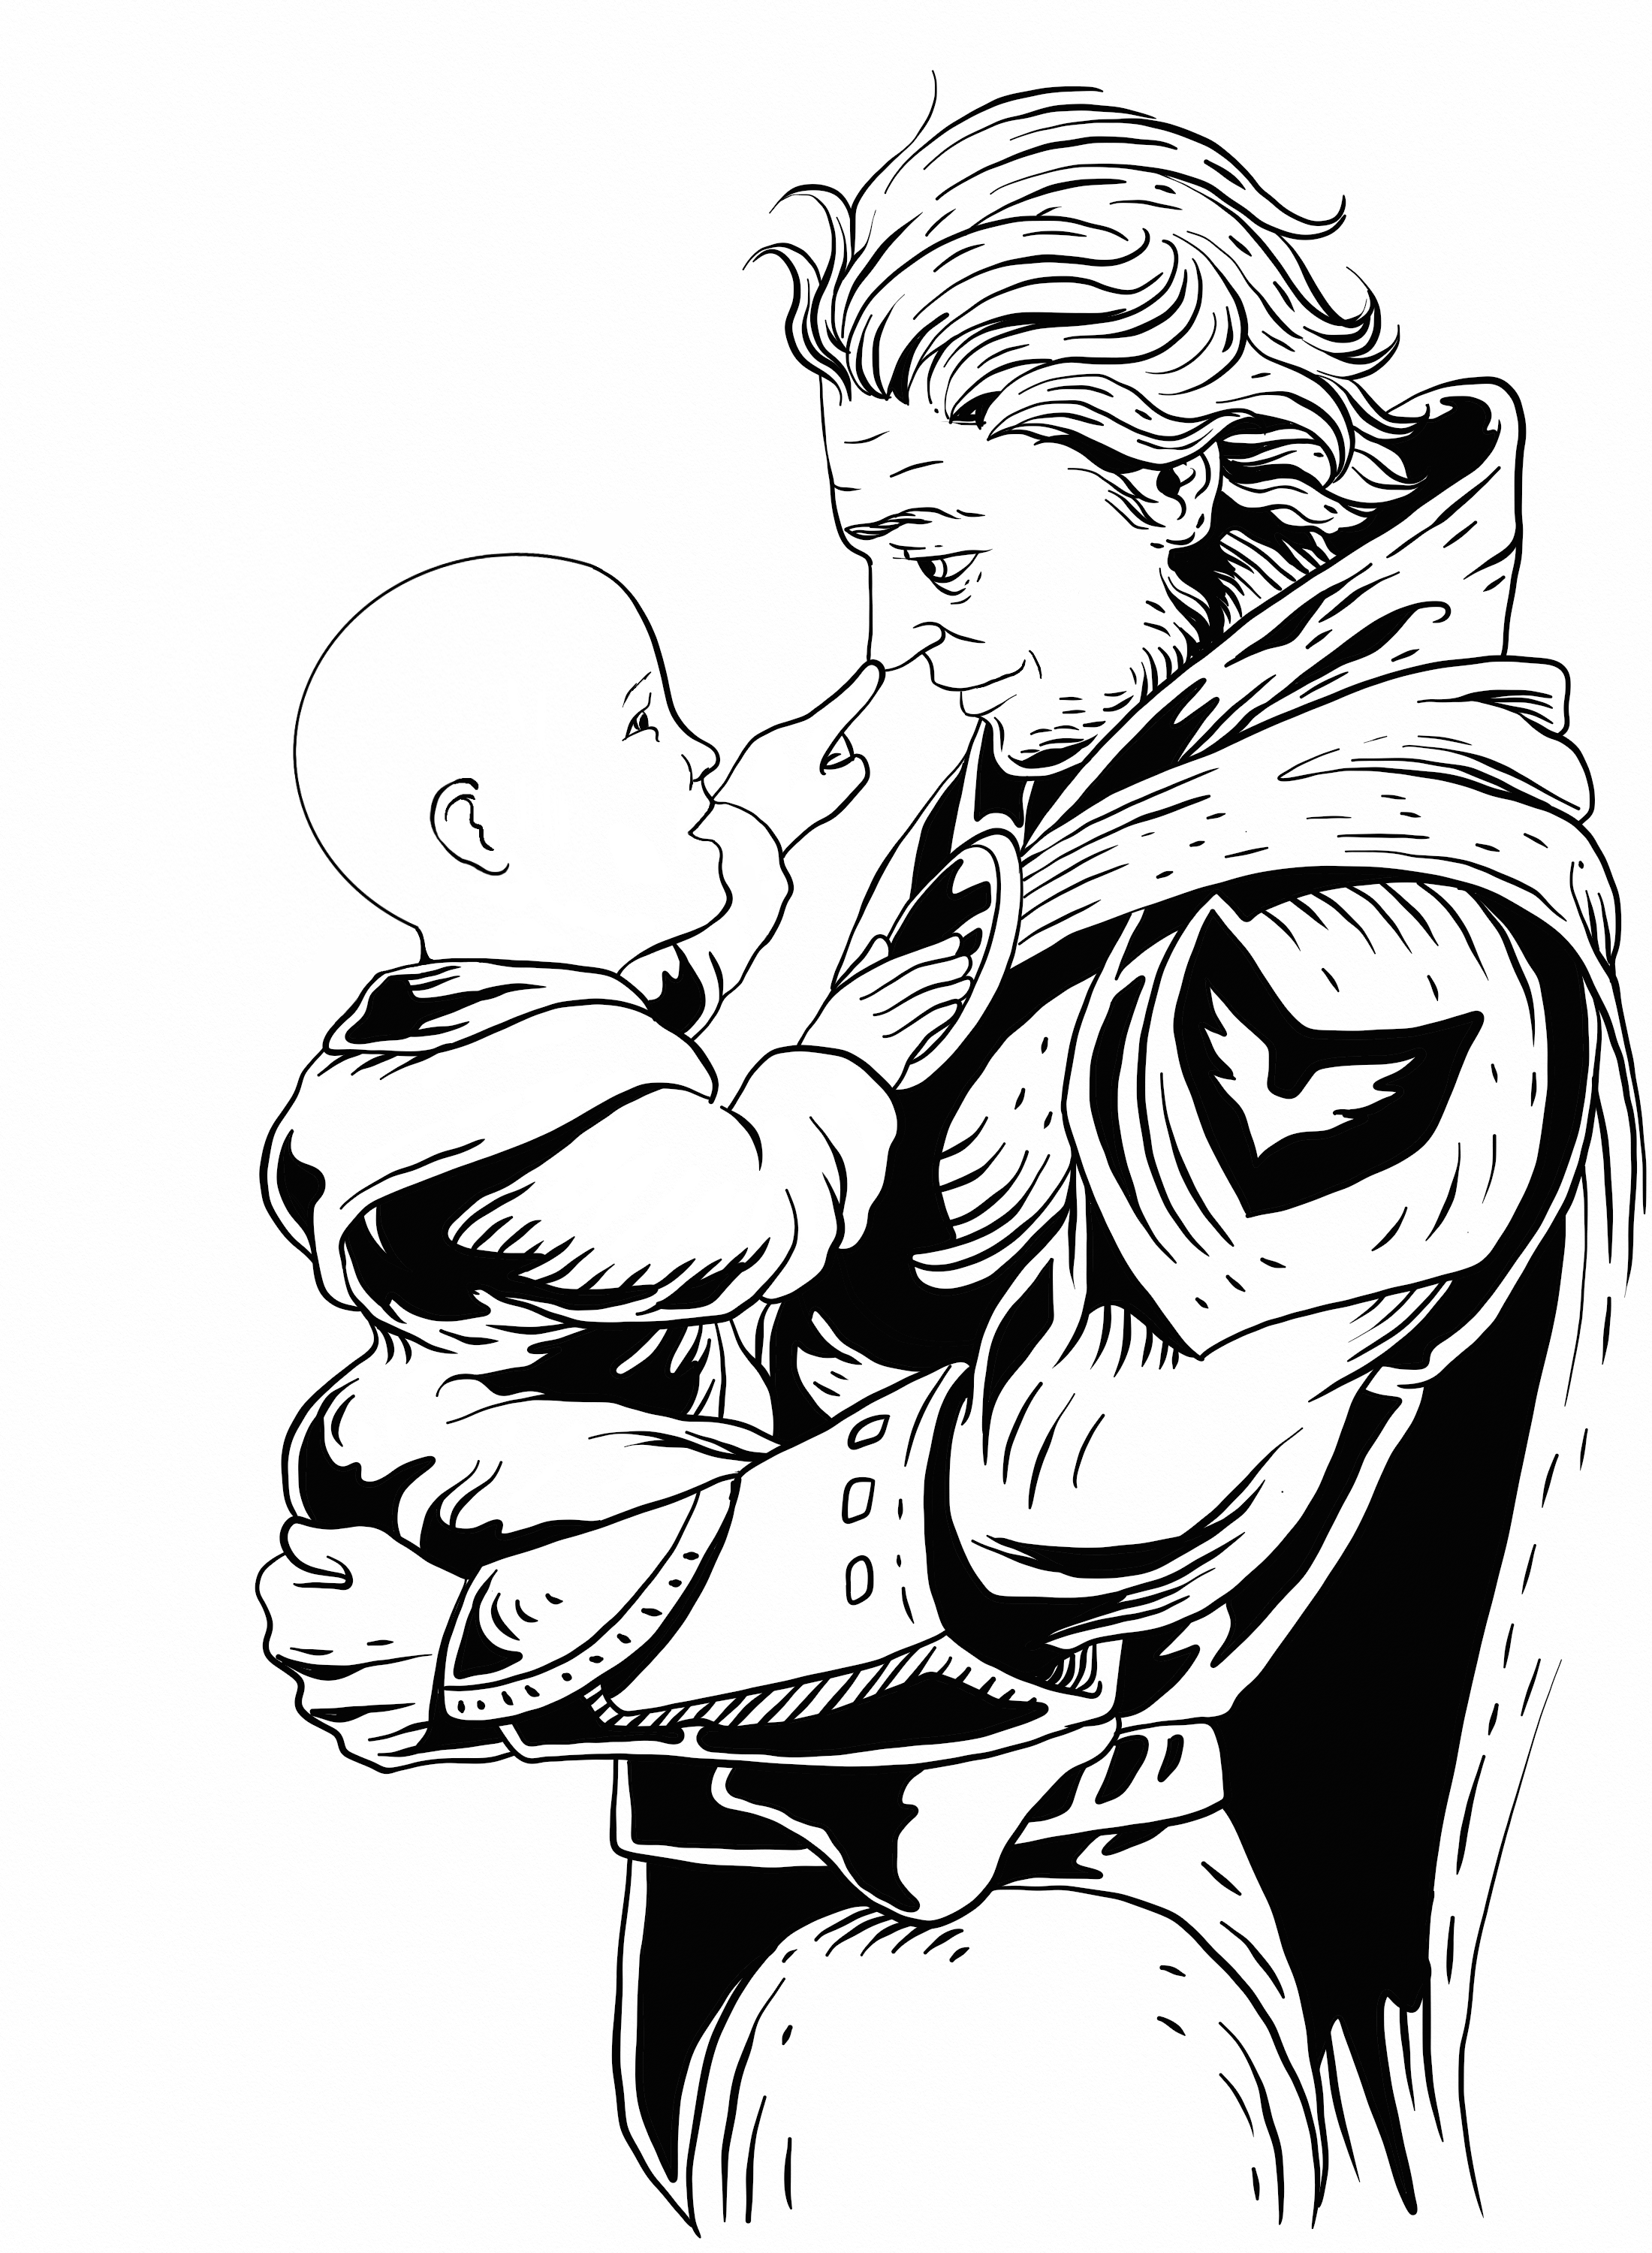 A knight in armour holding a baby